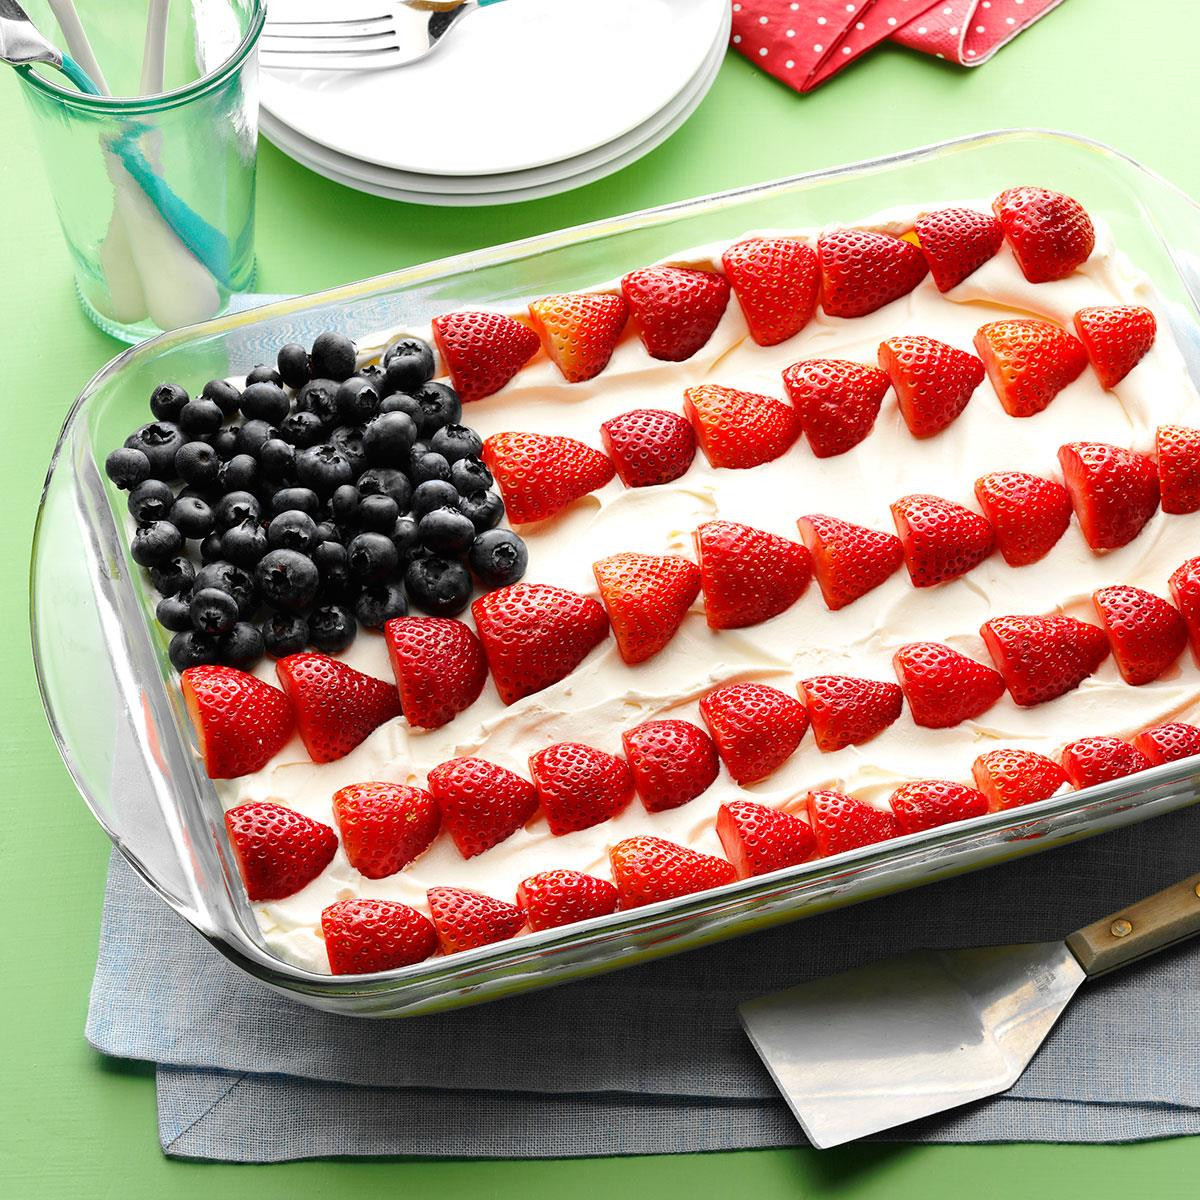 4Th Of July Fruit Desserts
 Picture Perfect Desserts for the 4th of July